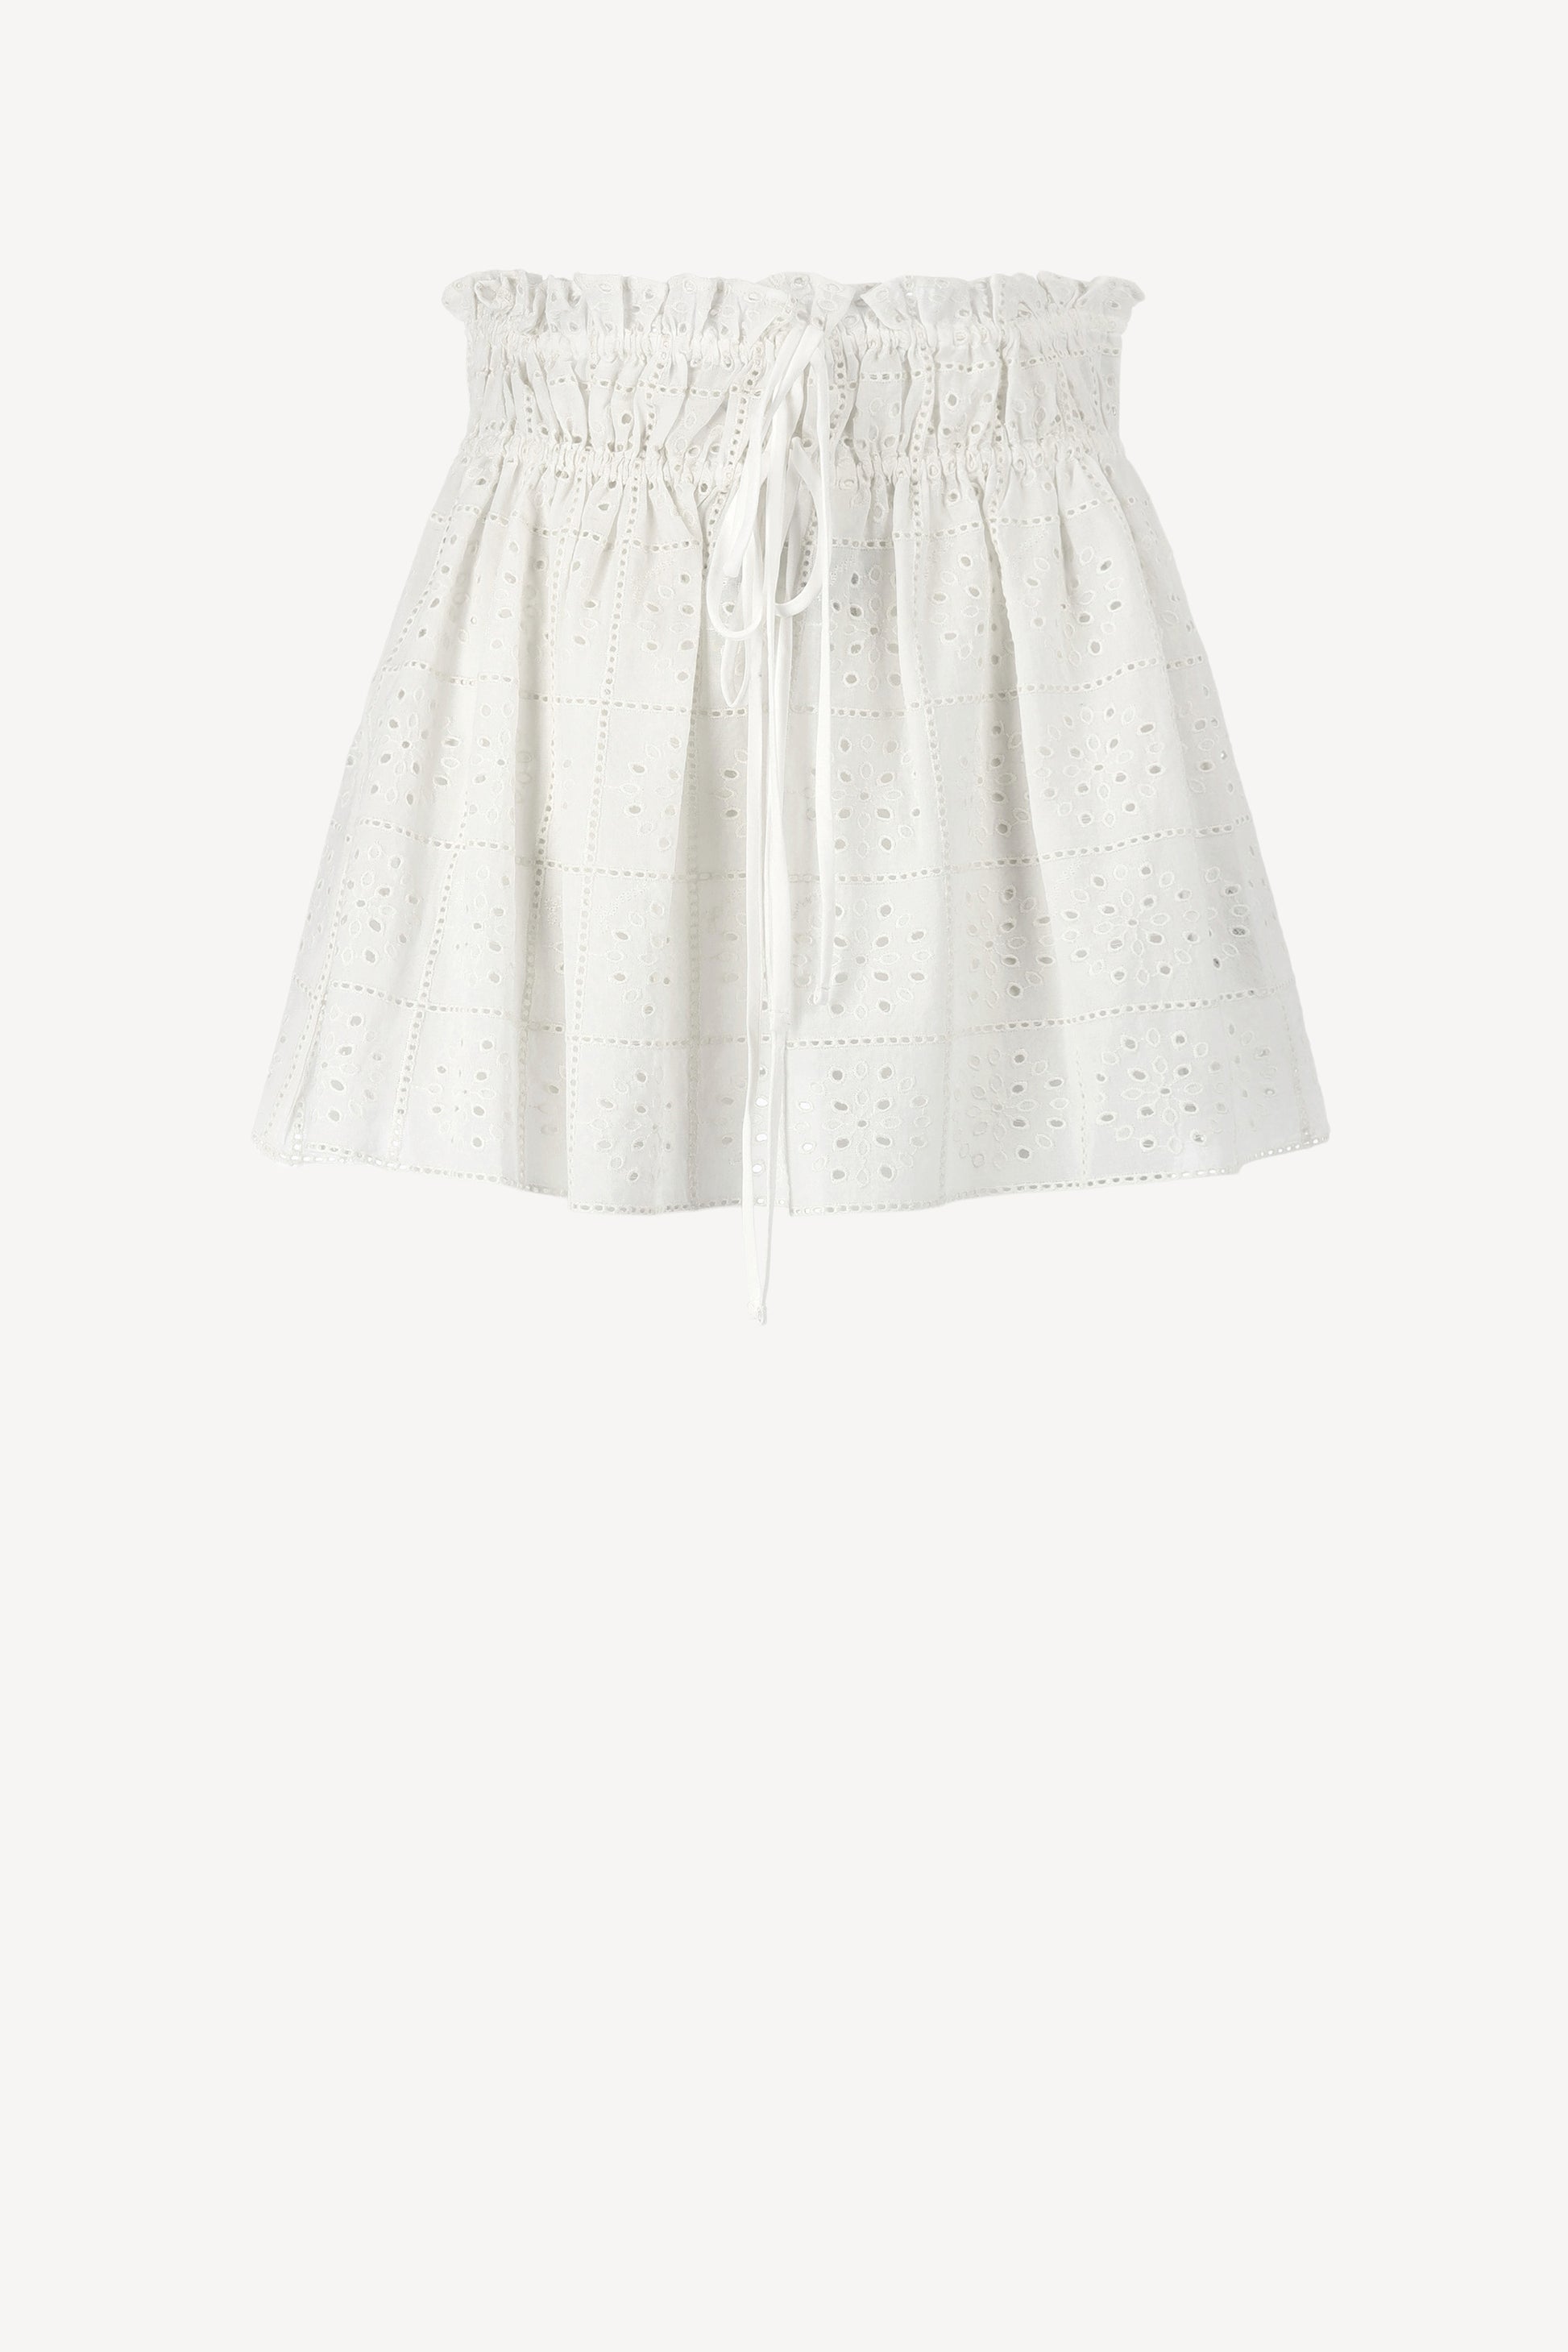 Rock Broderie Anglaise in Bright WhiteGanni - Anita Hass